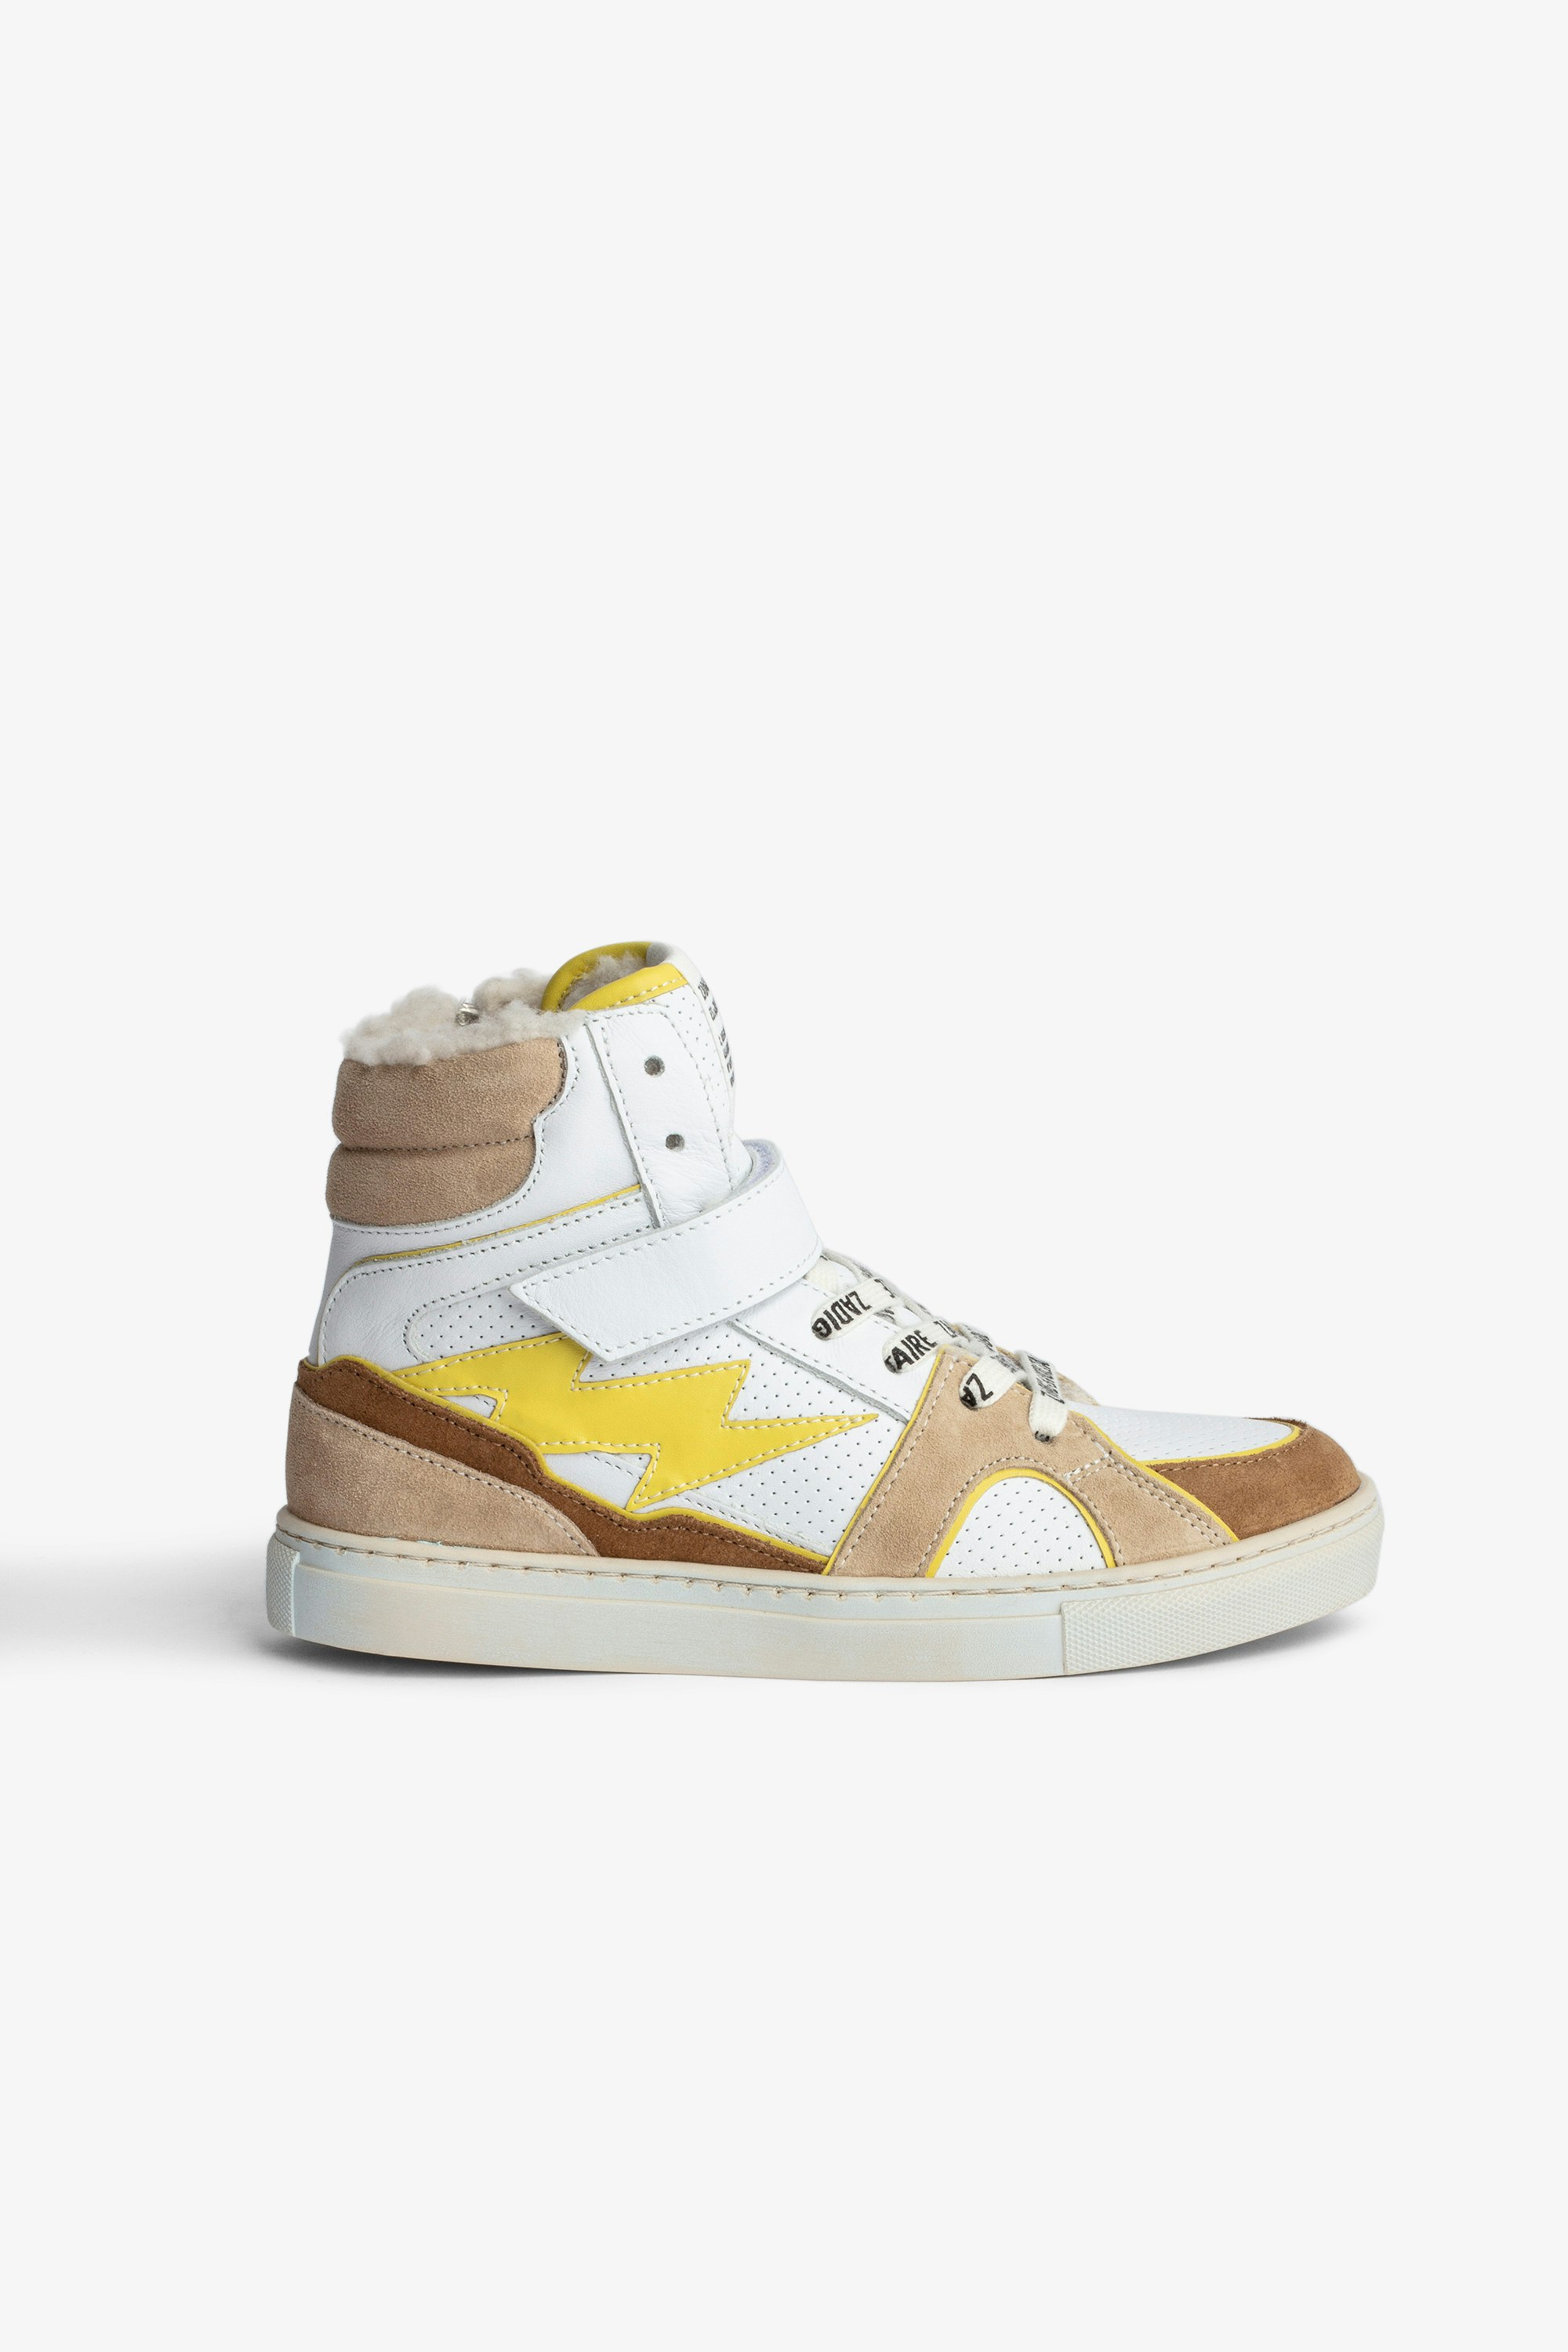 High Flash Children’s スニーカー Children’s white leather high-top sneakers with contrasting lightning flash patch 